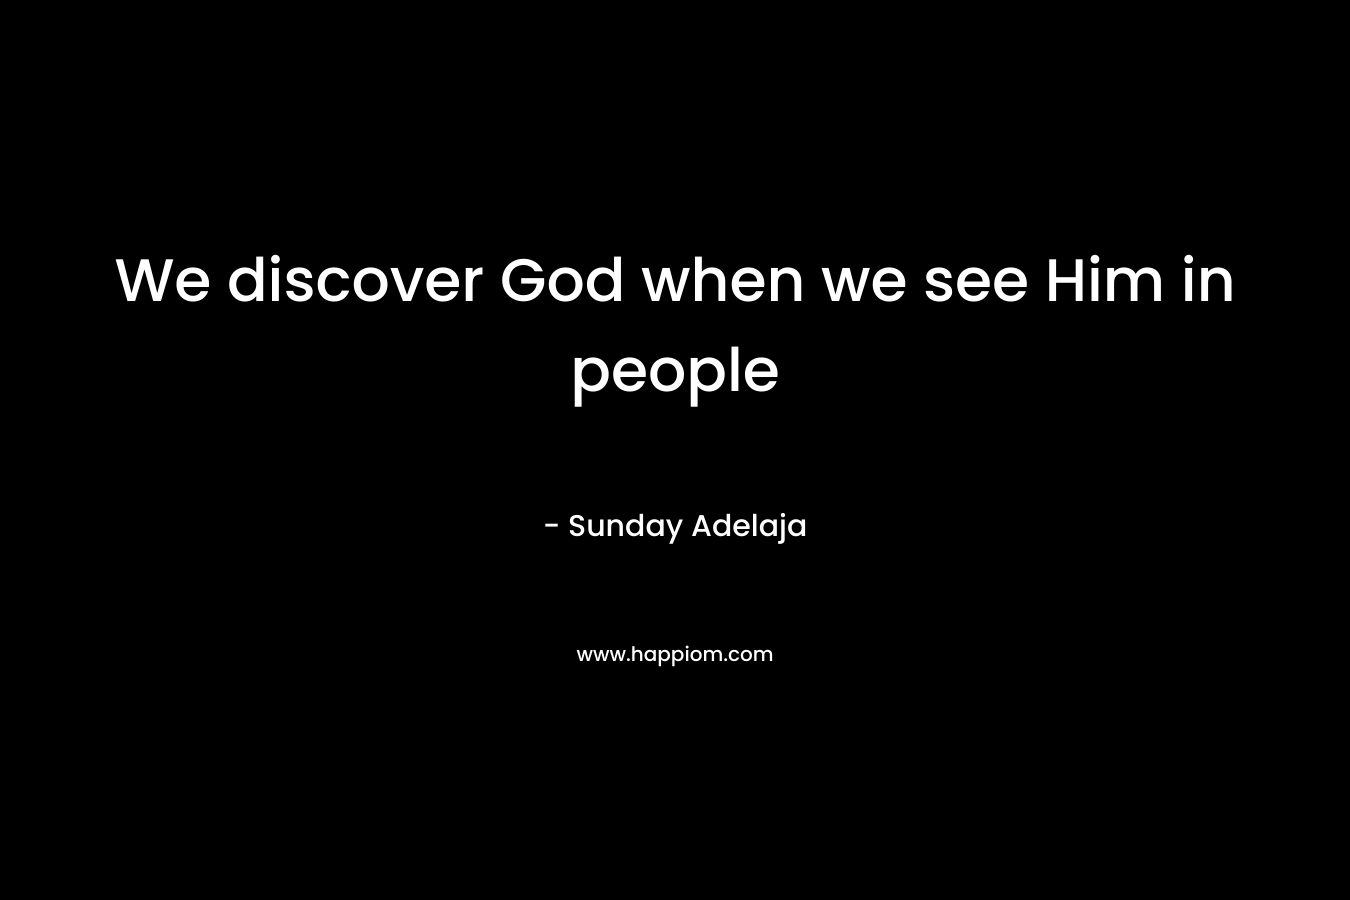 We discover God when we see Him in people